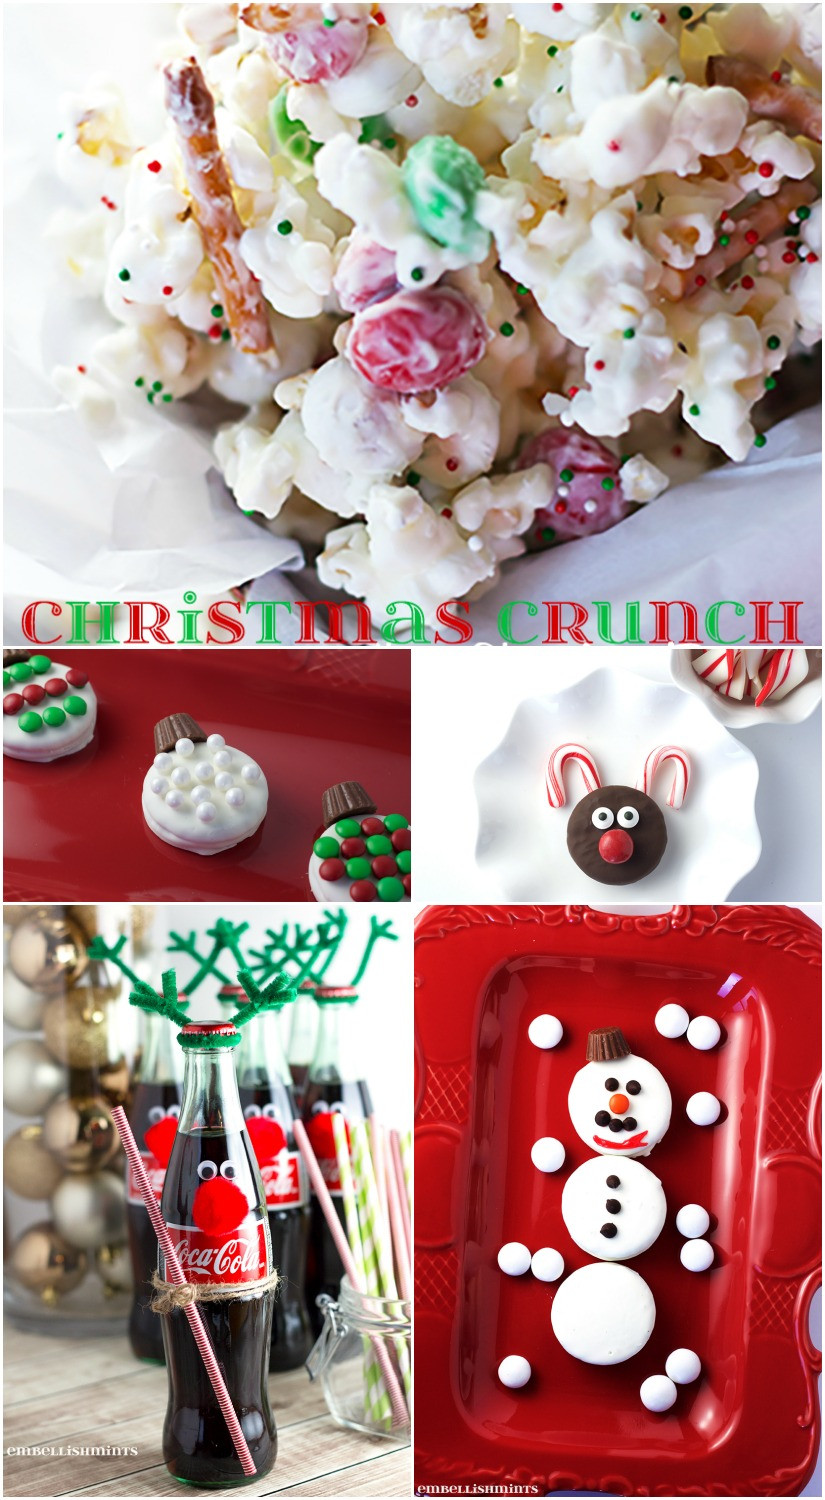 Kid Christmas Party Food Ideas
 Christmas Party Food Ideas For Kids Embellishmints